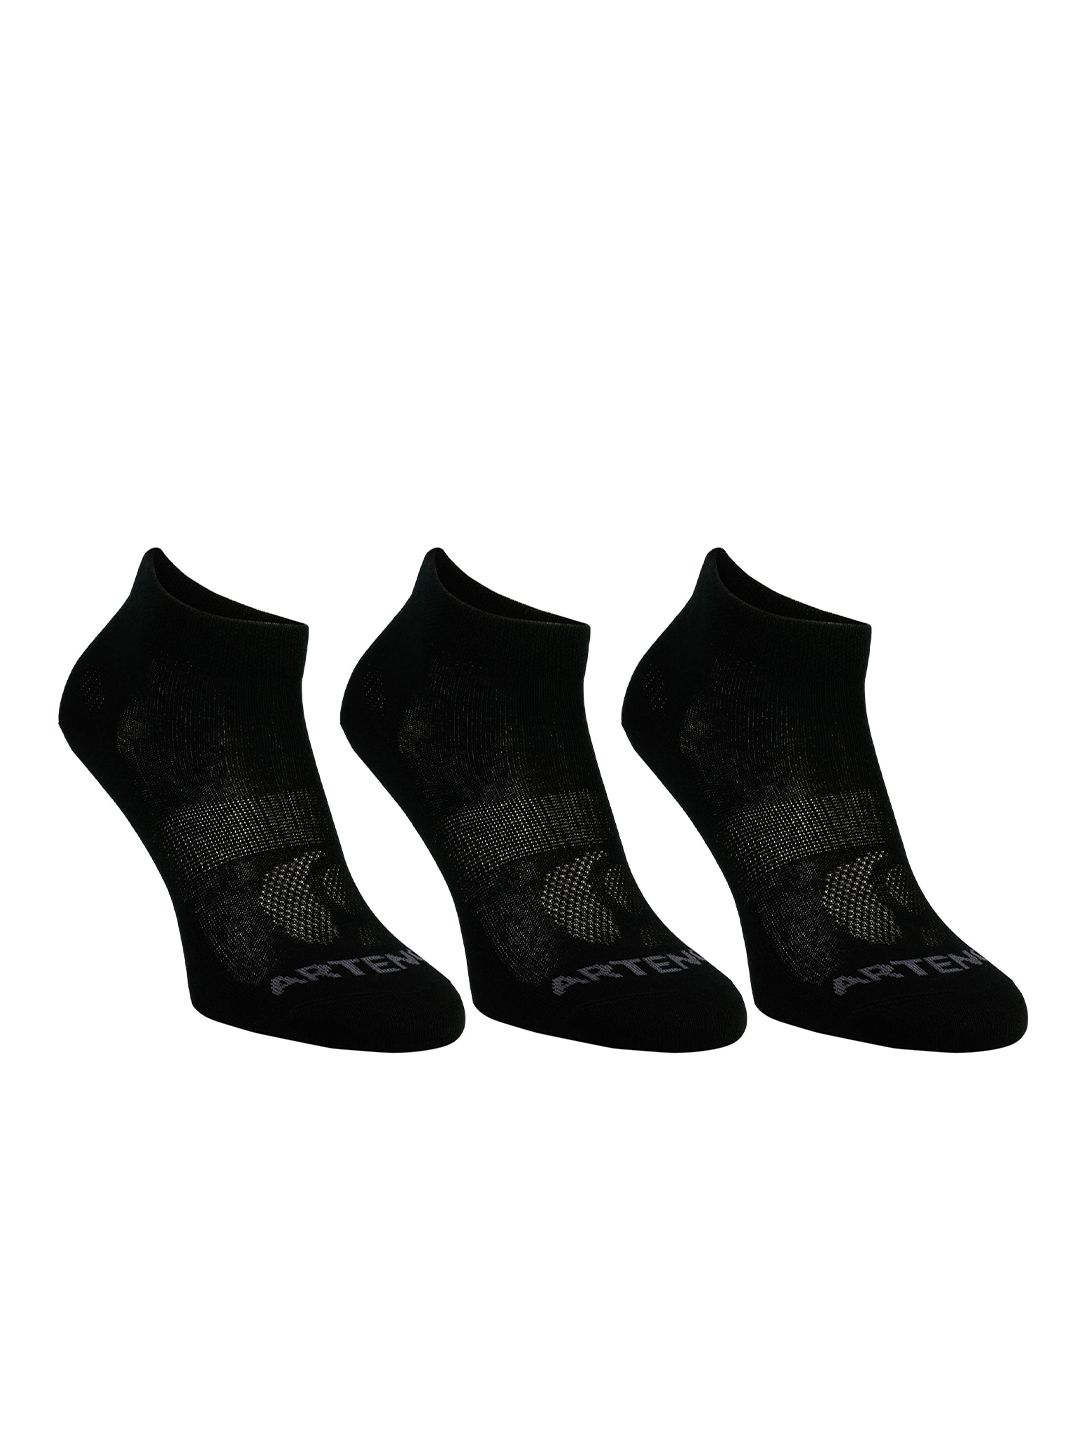 Artengo By Decathlon Adults Black Pack of 3 Ankle Length Socks Price in India